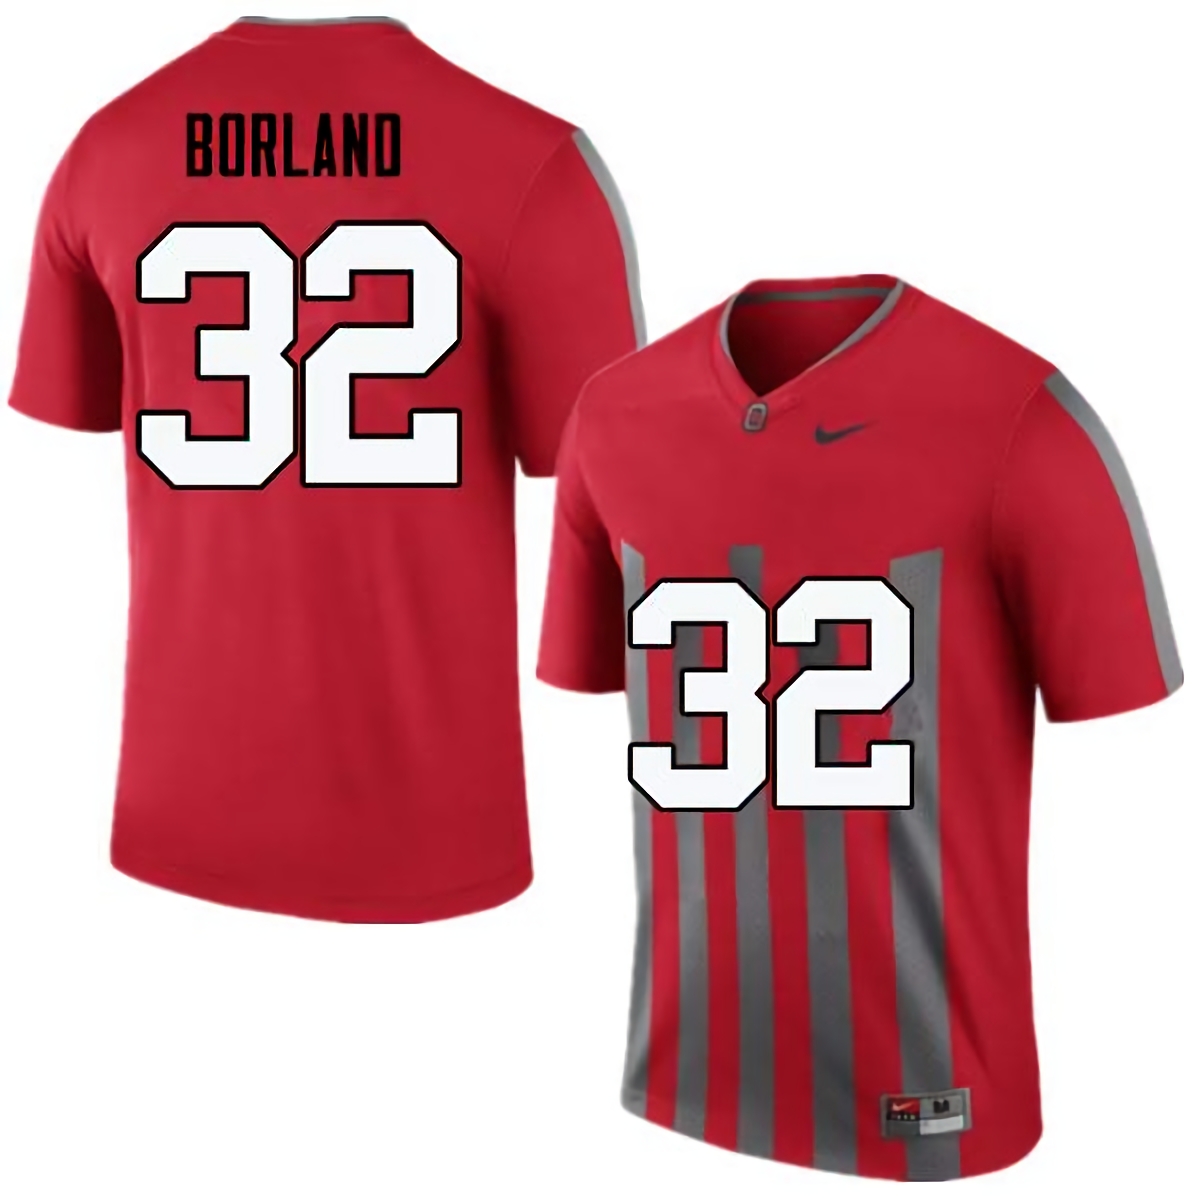 Tuf Borland Ohio State Buckeyes Men's NCAA #32 Nike Throwback Red College Stitched Football Jersey LRT1156RY